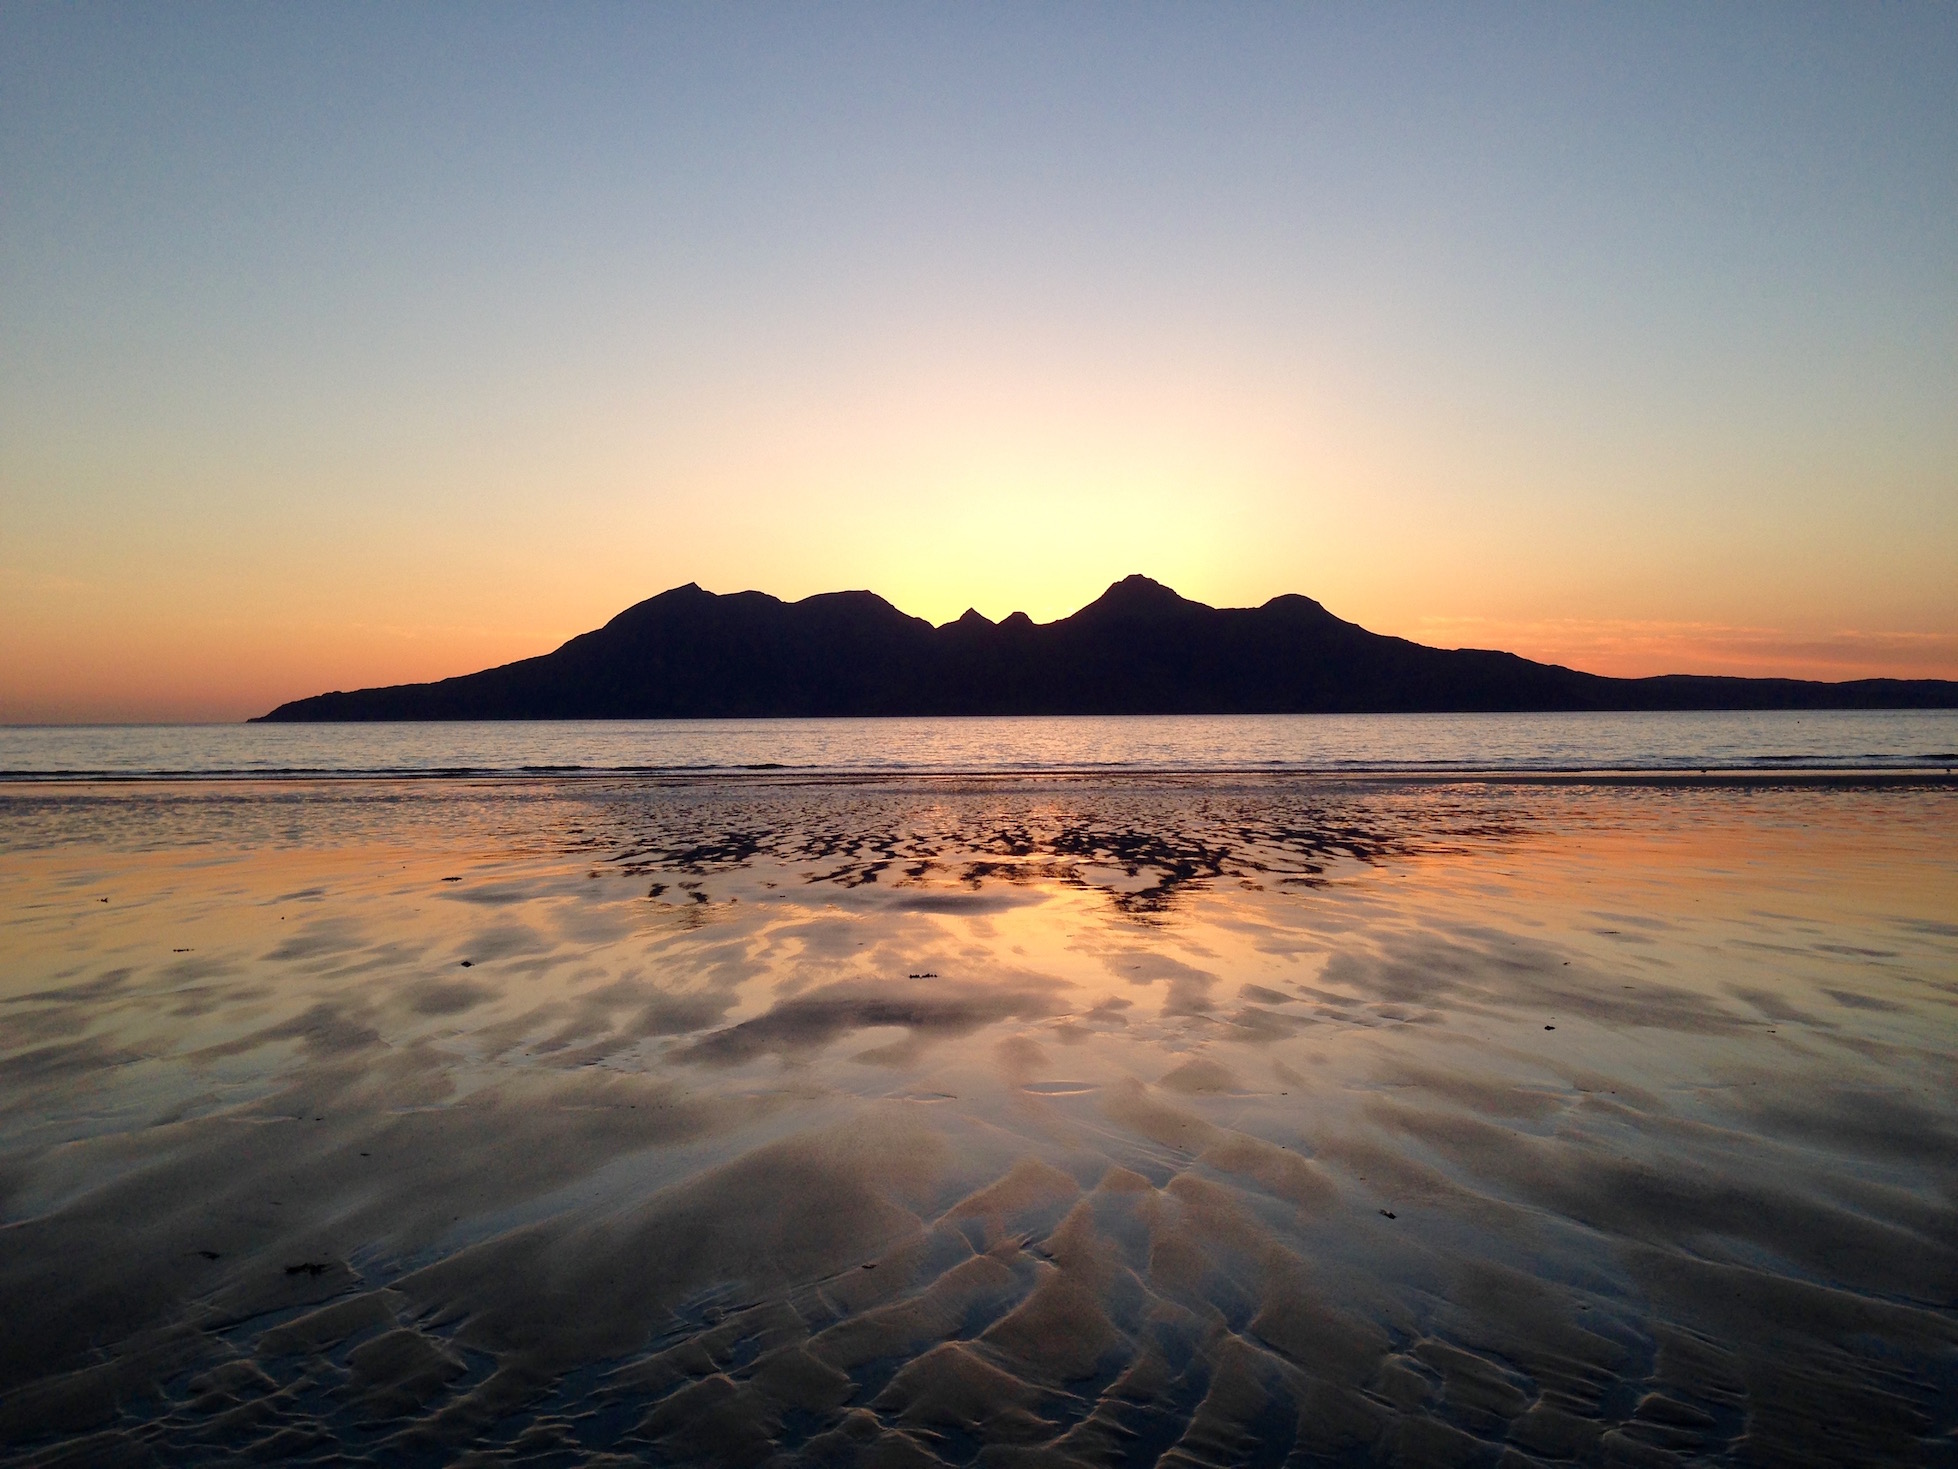 25-Laig-Beach-on-Eigg-looking-out-to-sunset-over-Isle-of-Rum-1